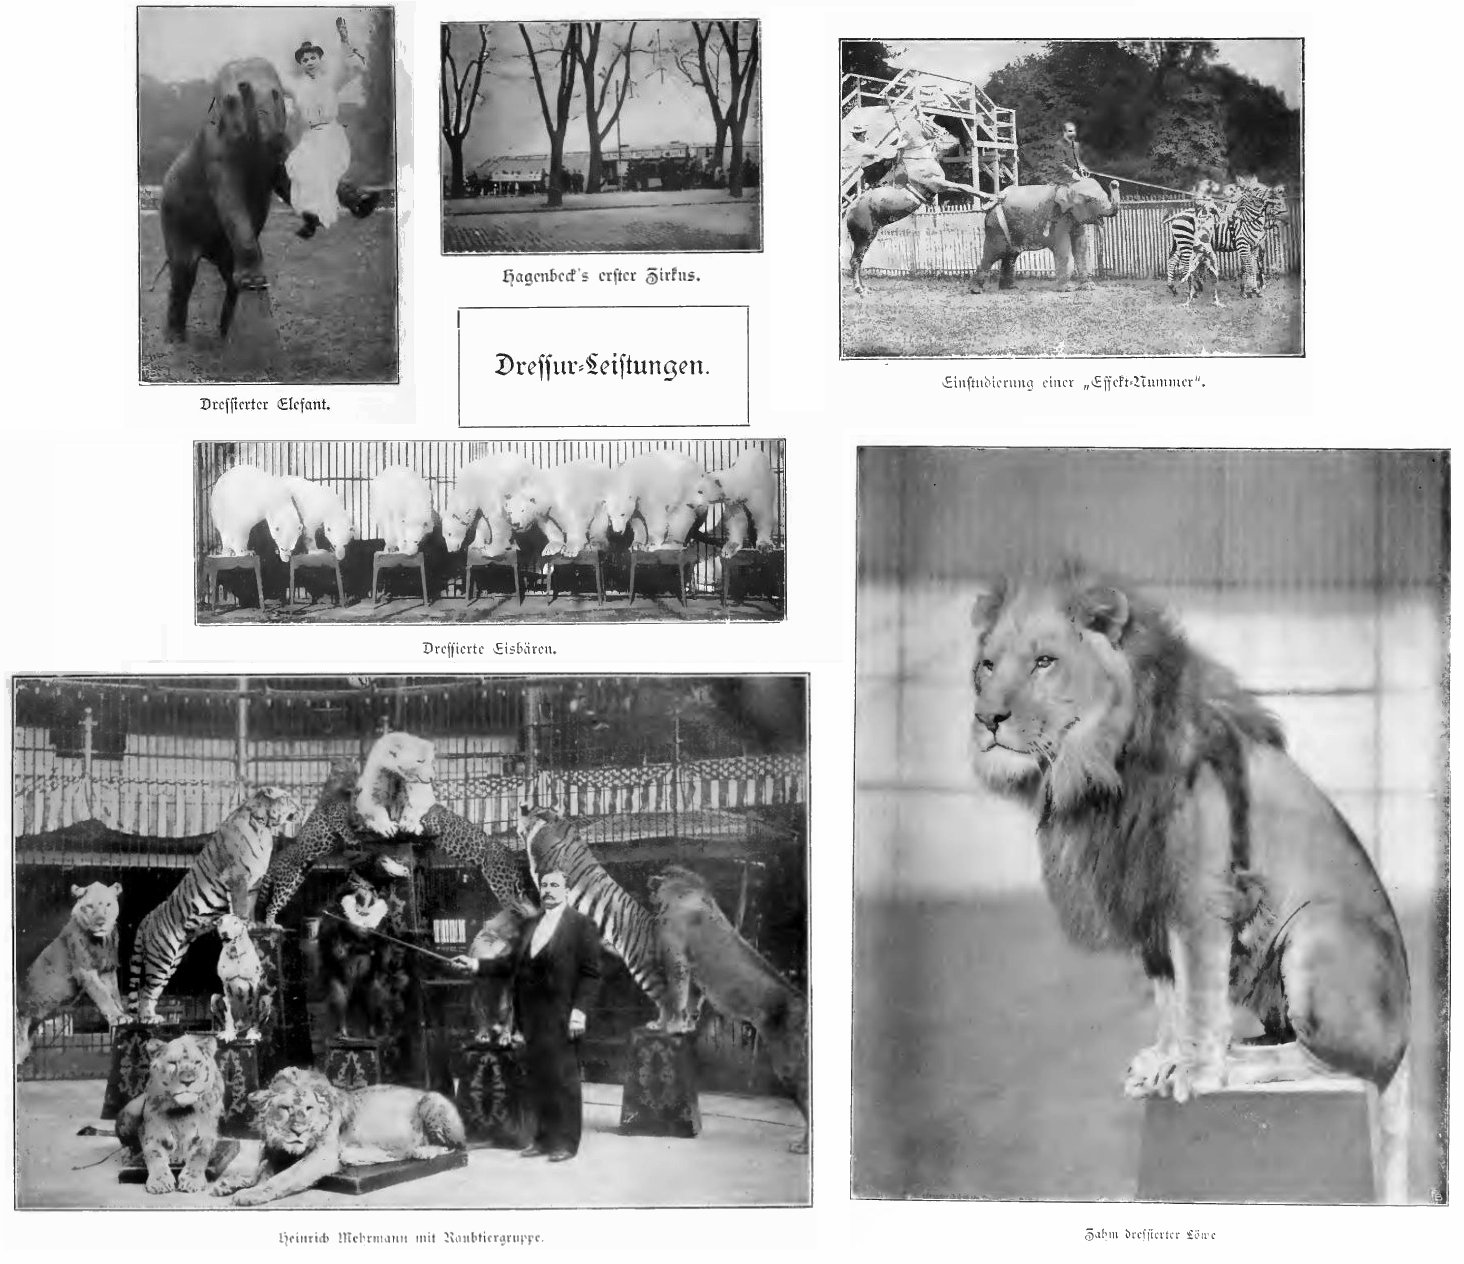 Truth or Tail: A camel's hump Cleveland Zoological Society